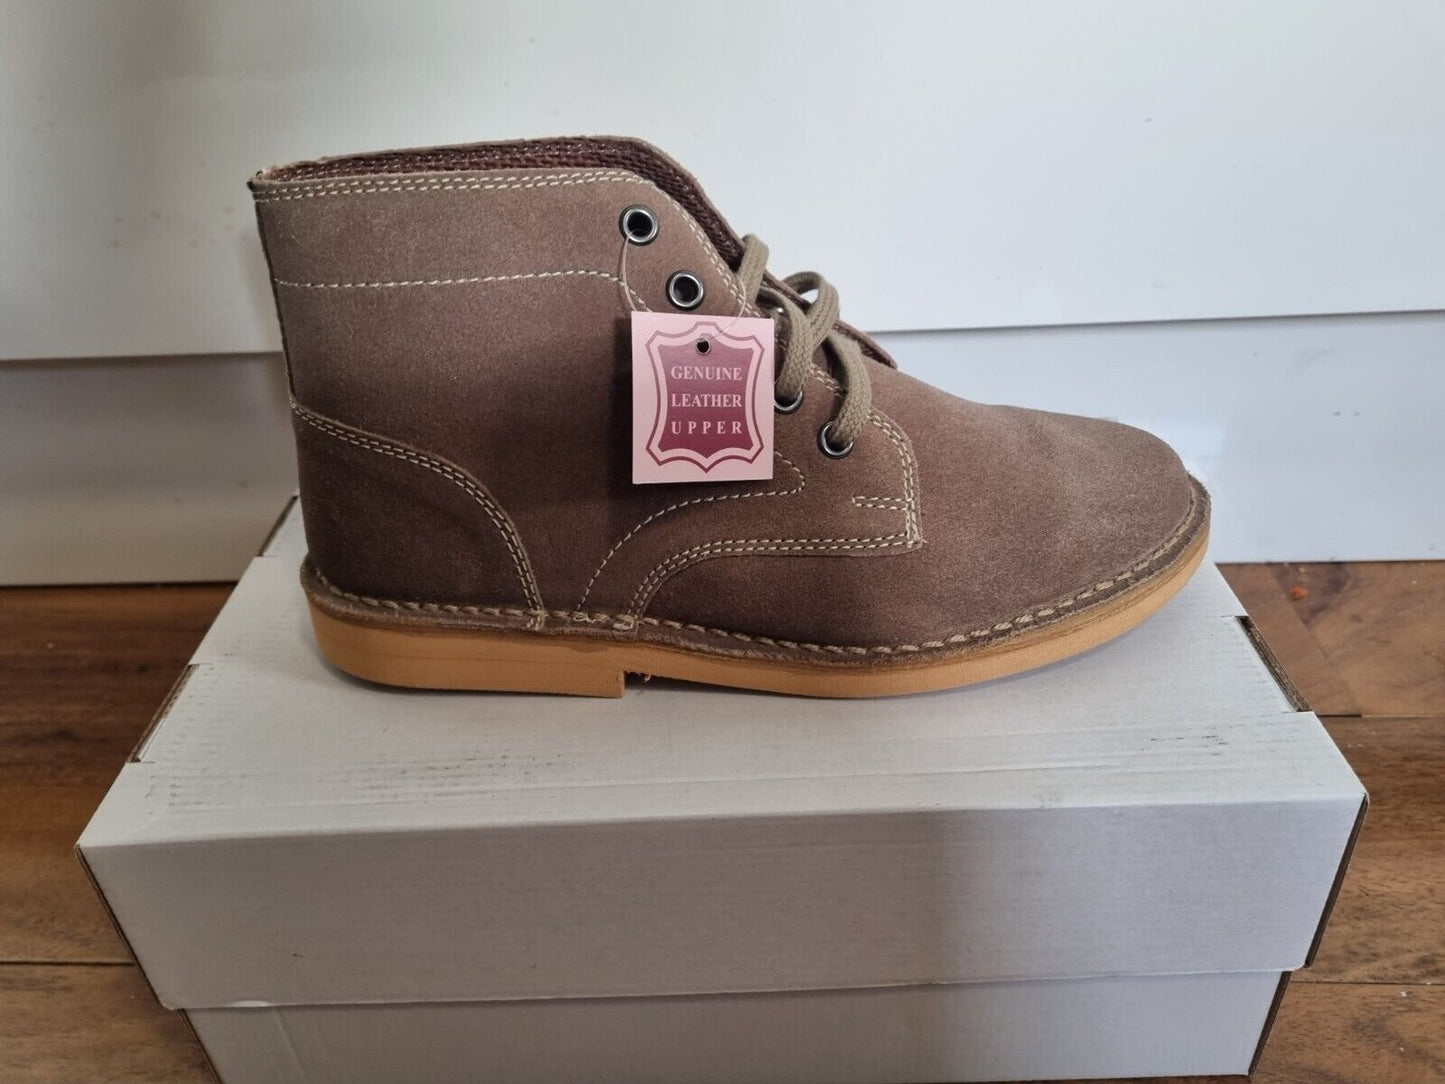 Desert Boot by Roamers - Leisure 5 Eye Flat Sole Dark Taupe Suede Leather (M468TS)